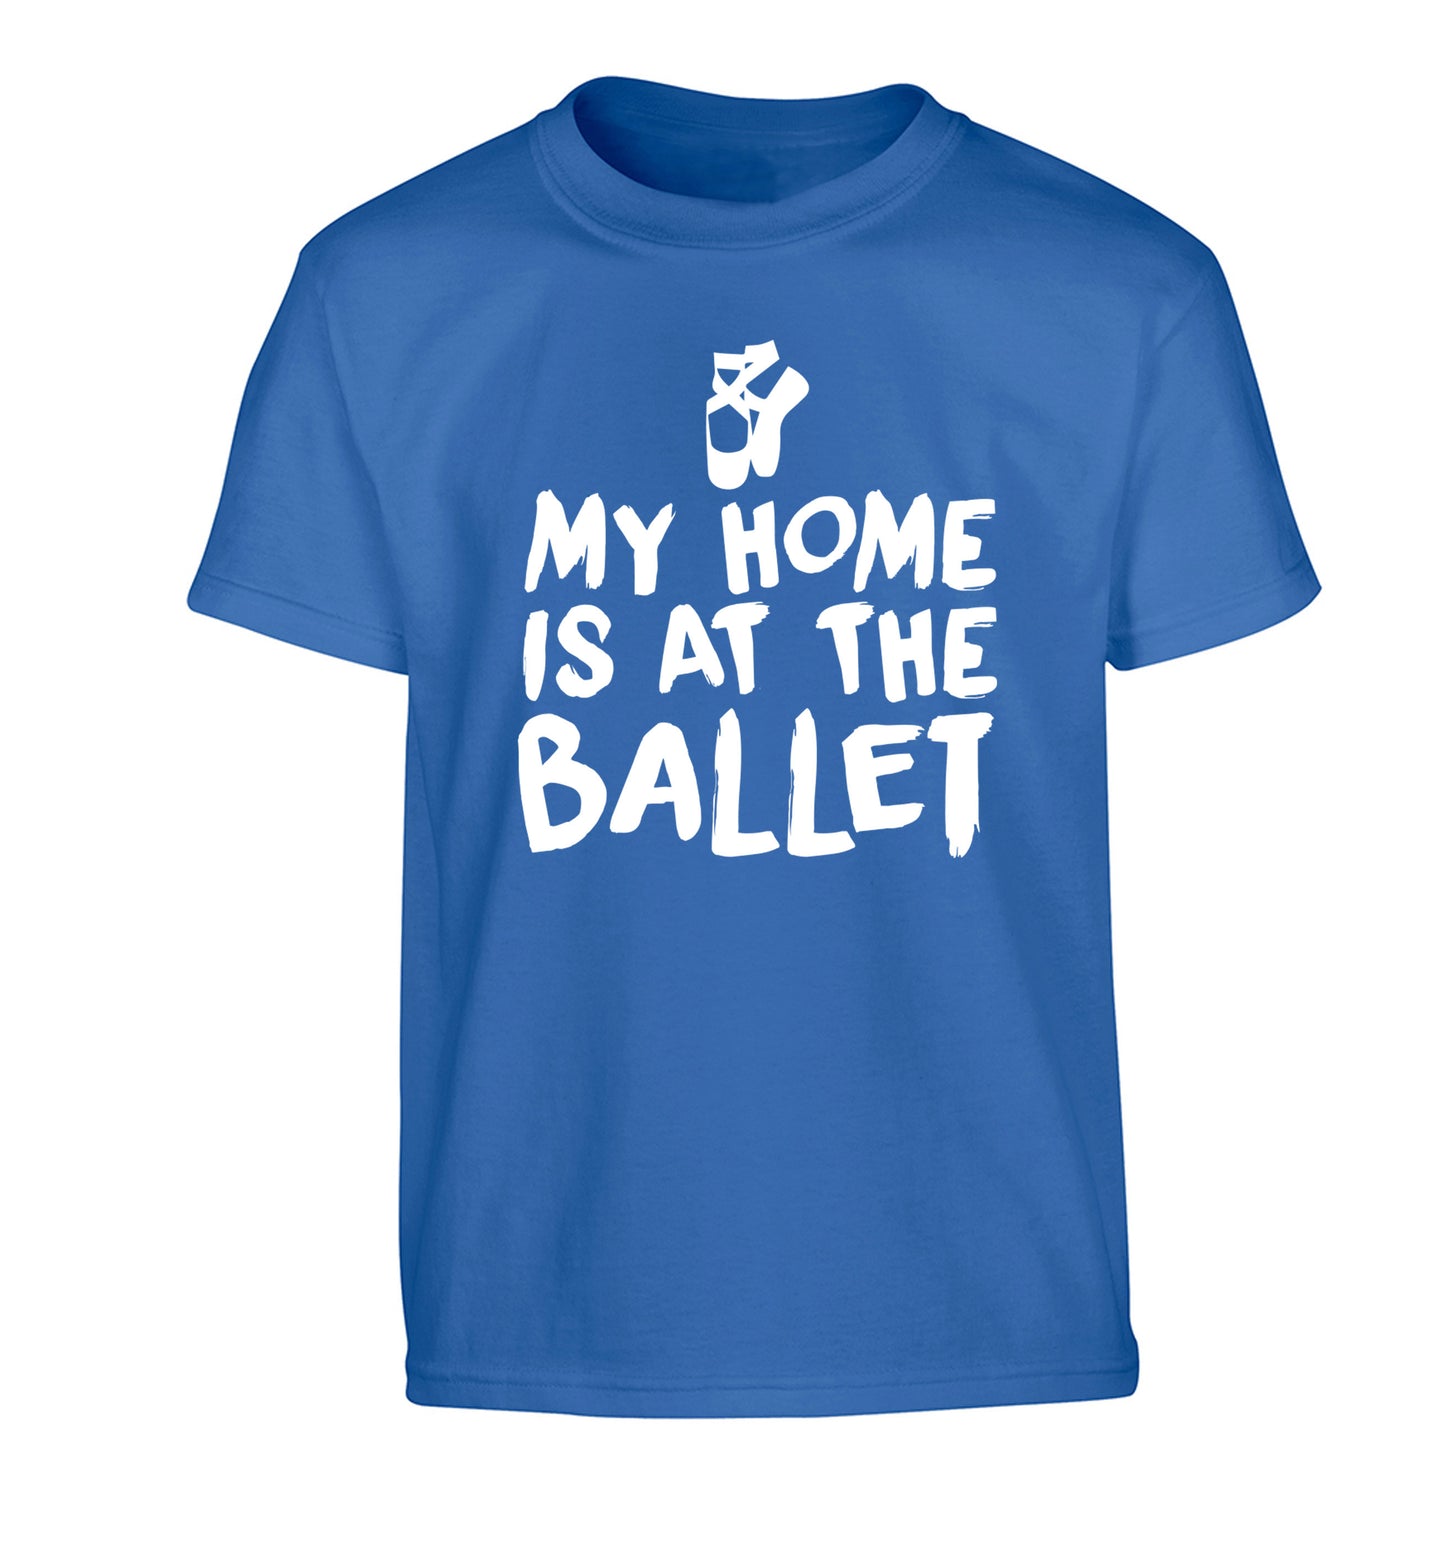 My home is at the ballet Children's blue Tshirt 12-14 Years